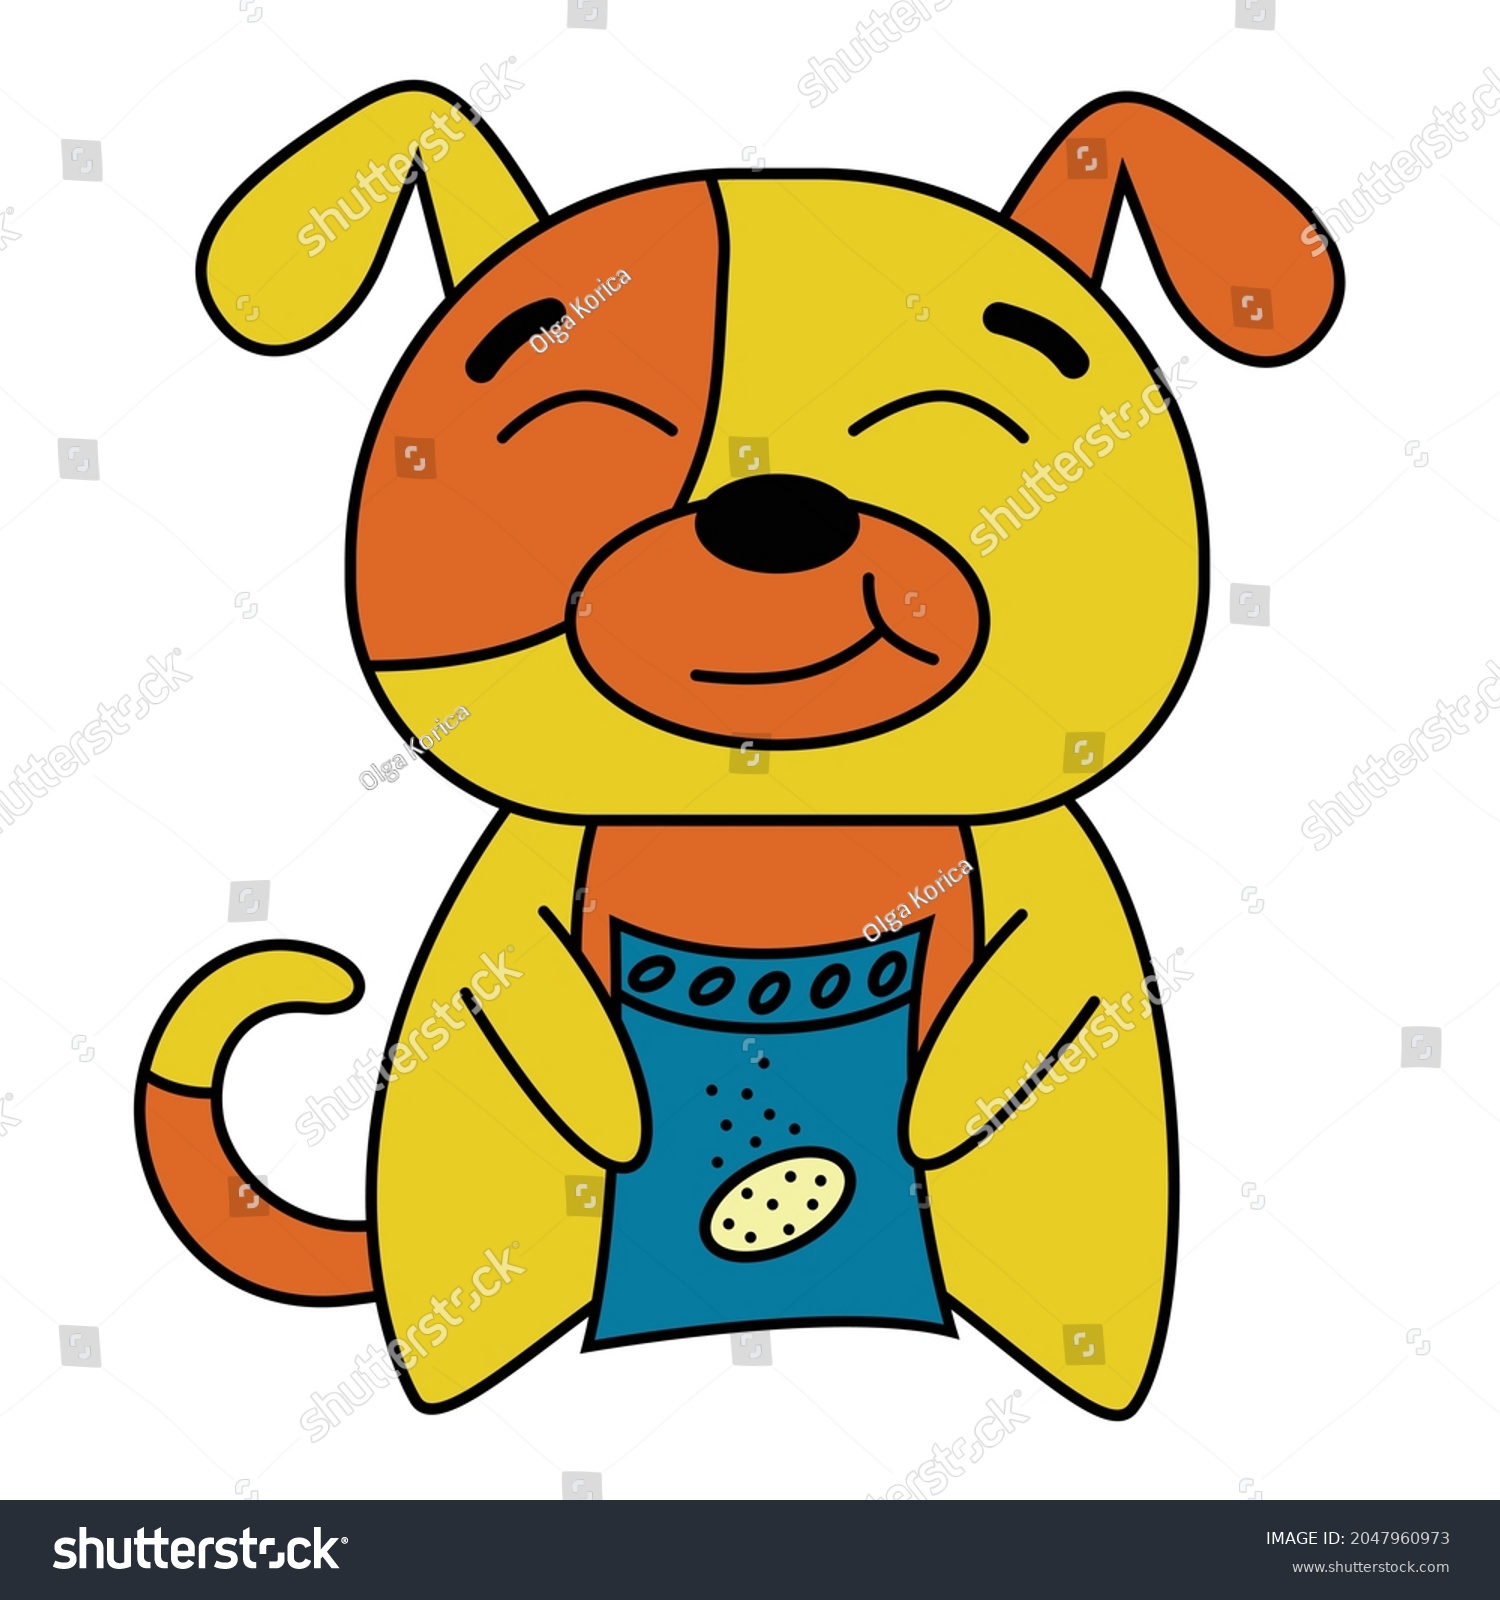 SVG of Cartoon dog sticker. Dog chewing dry food from package, cute mascot character vector illustration svg